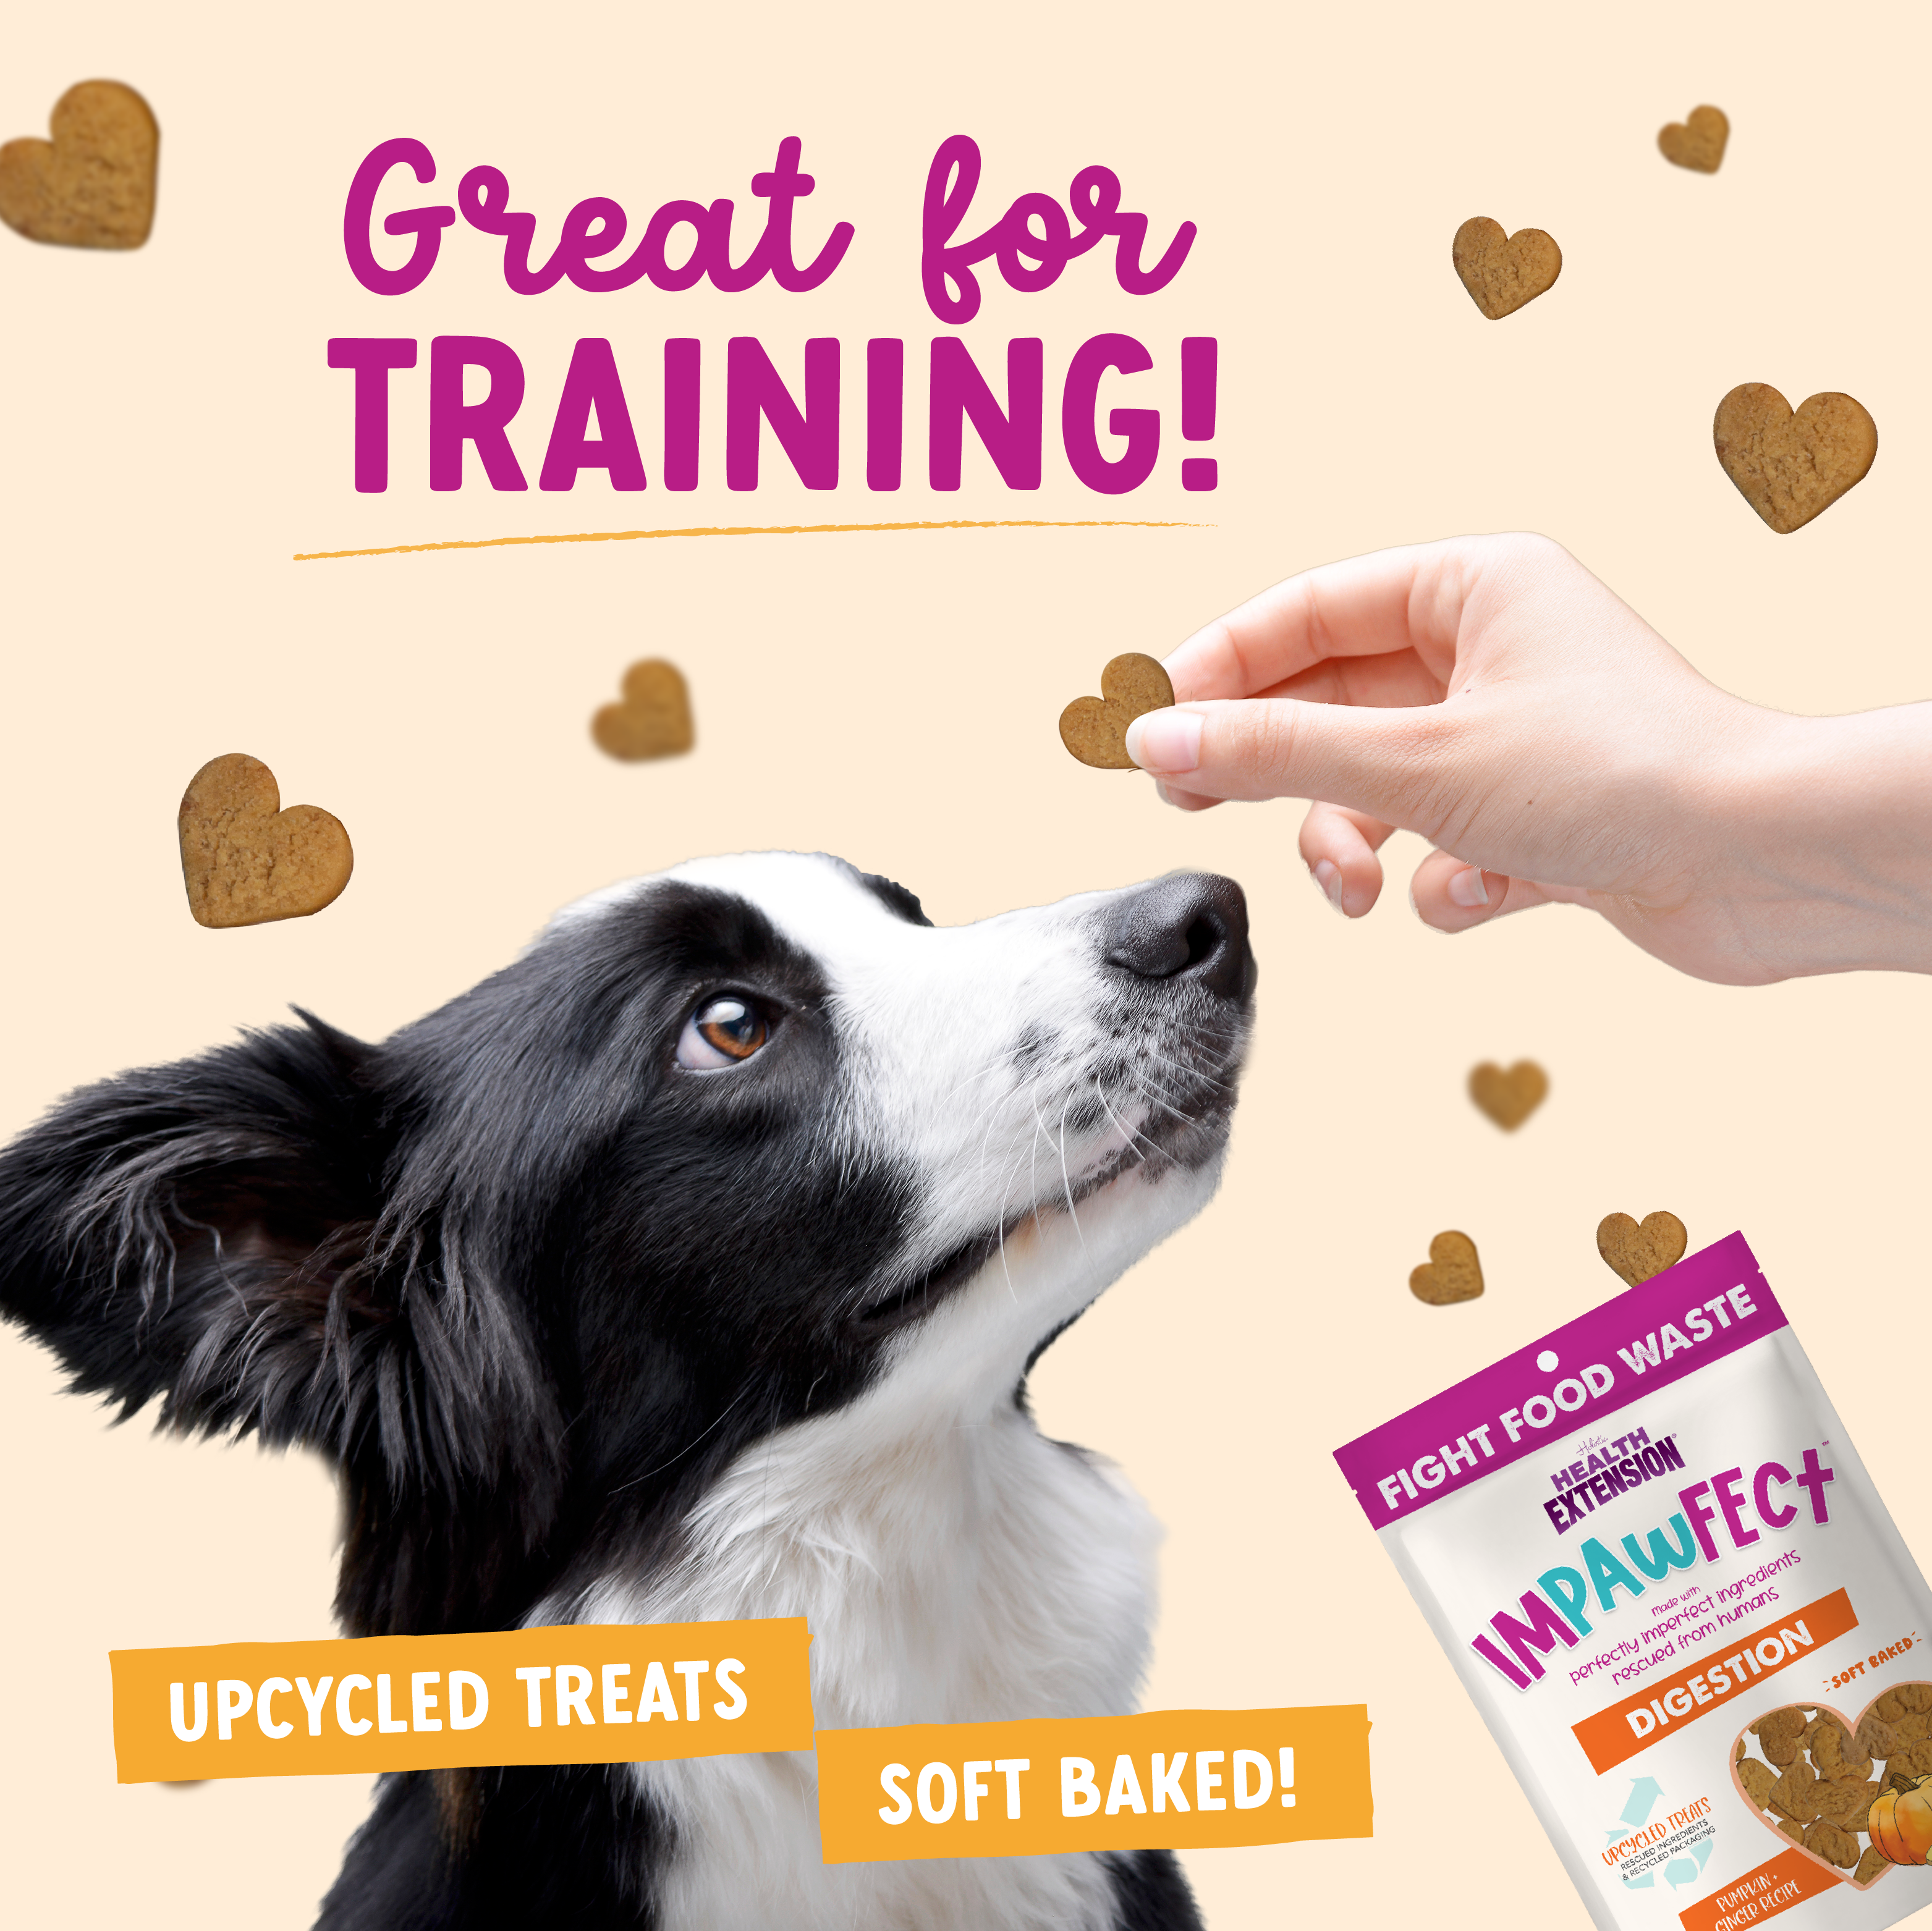 Impawfect Pumpkin & Ginger Treats for Digestive Support